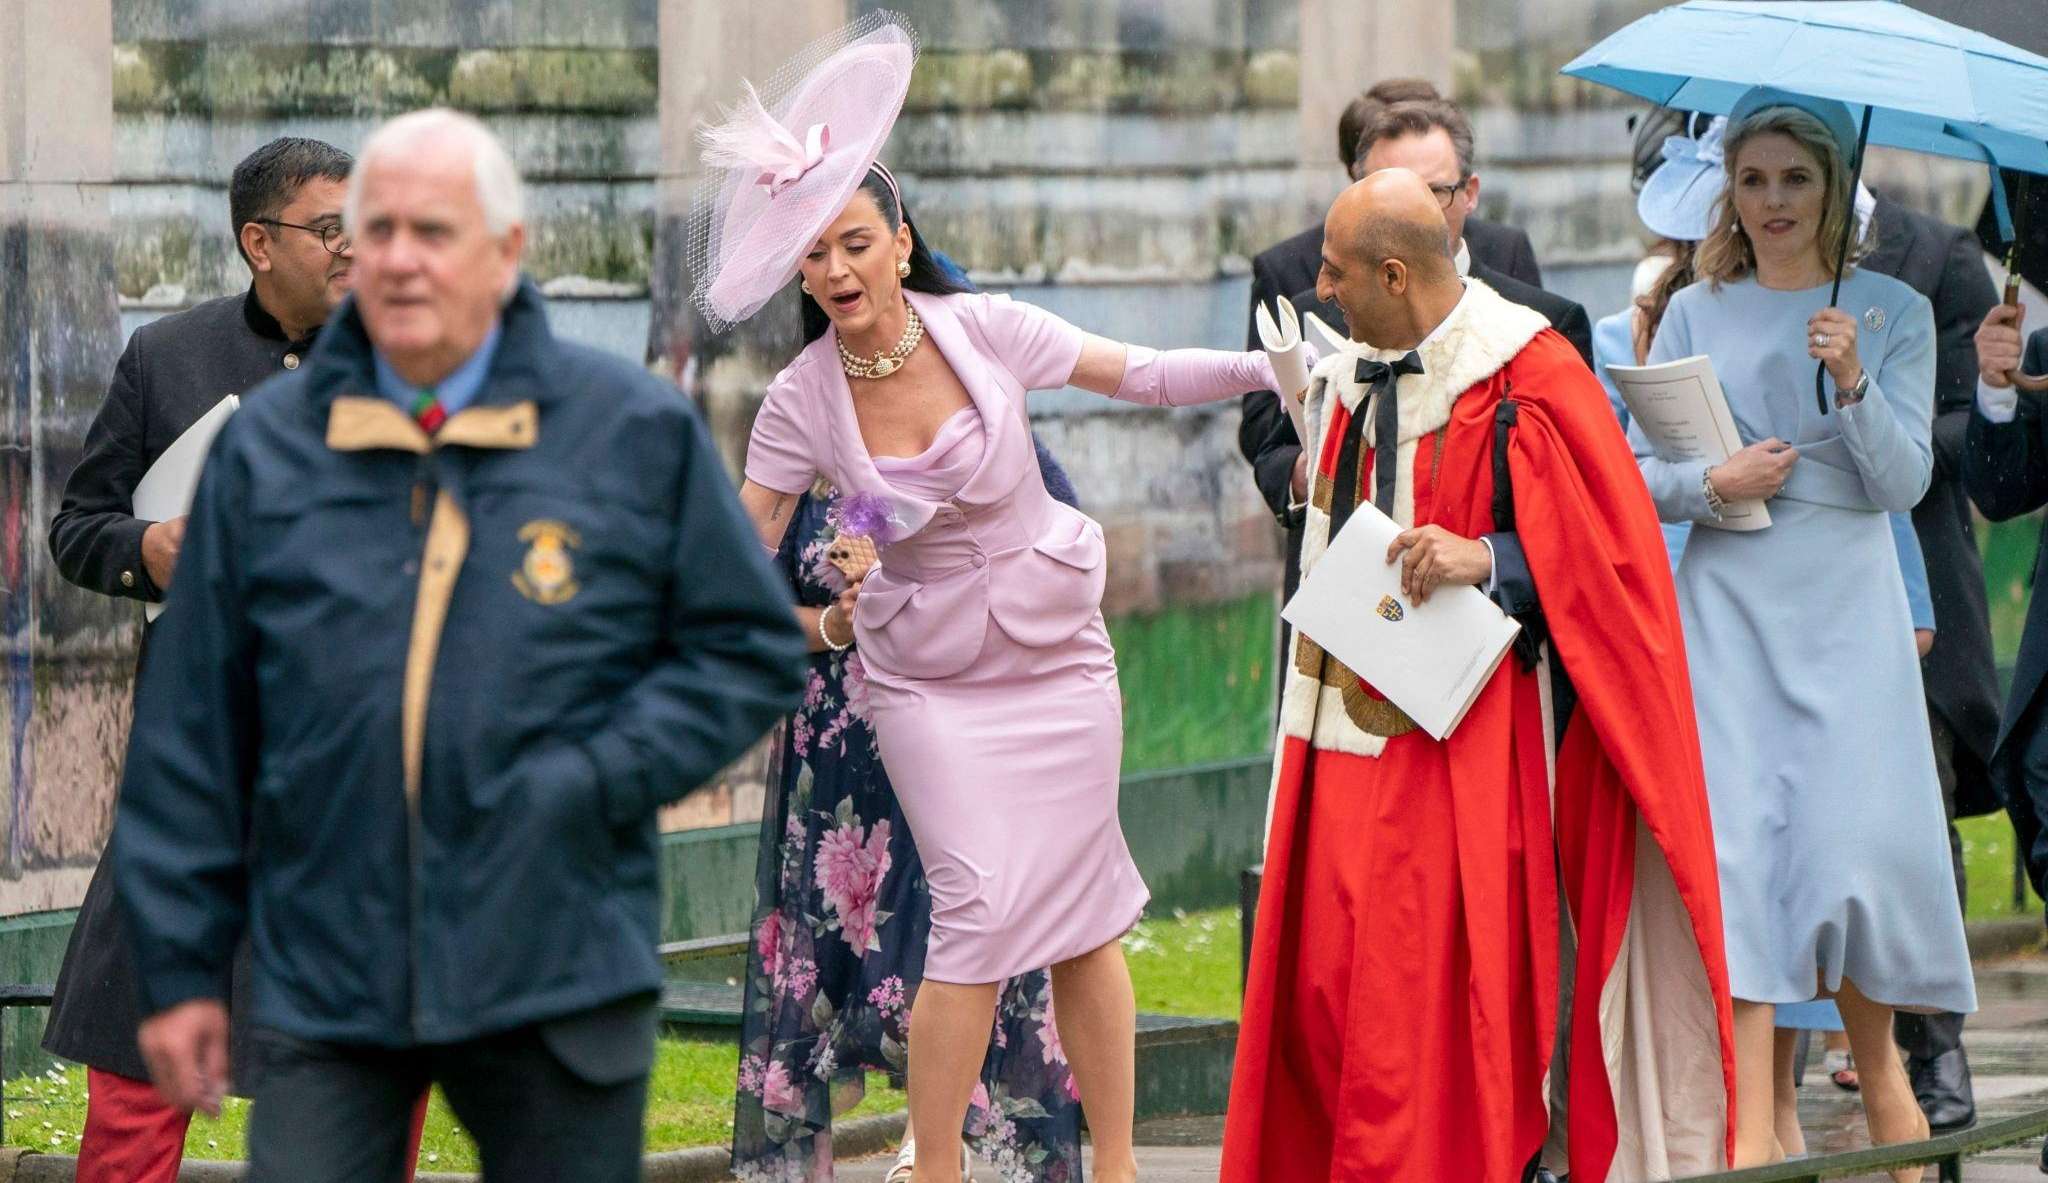 Katy Perry loses balance at King Charles ceremony and nearly